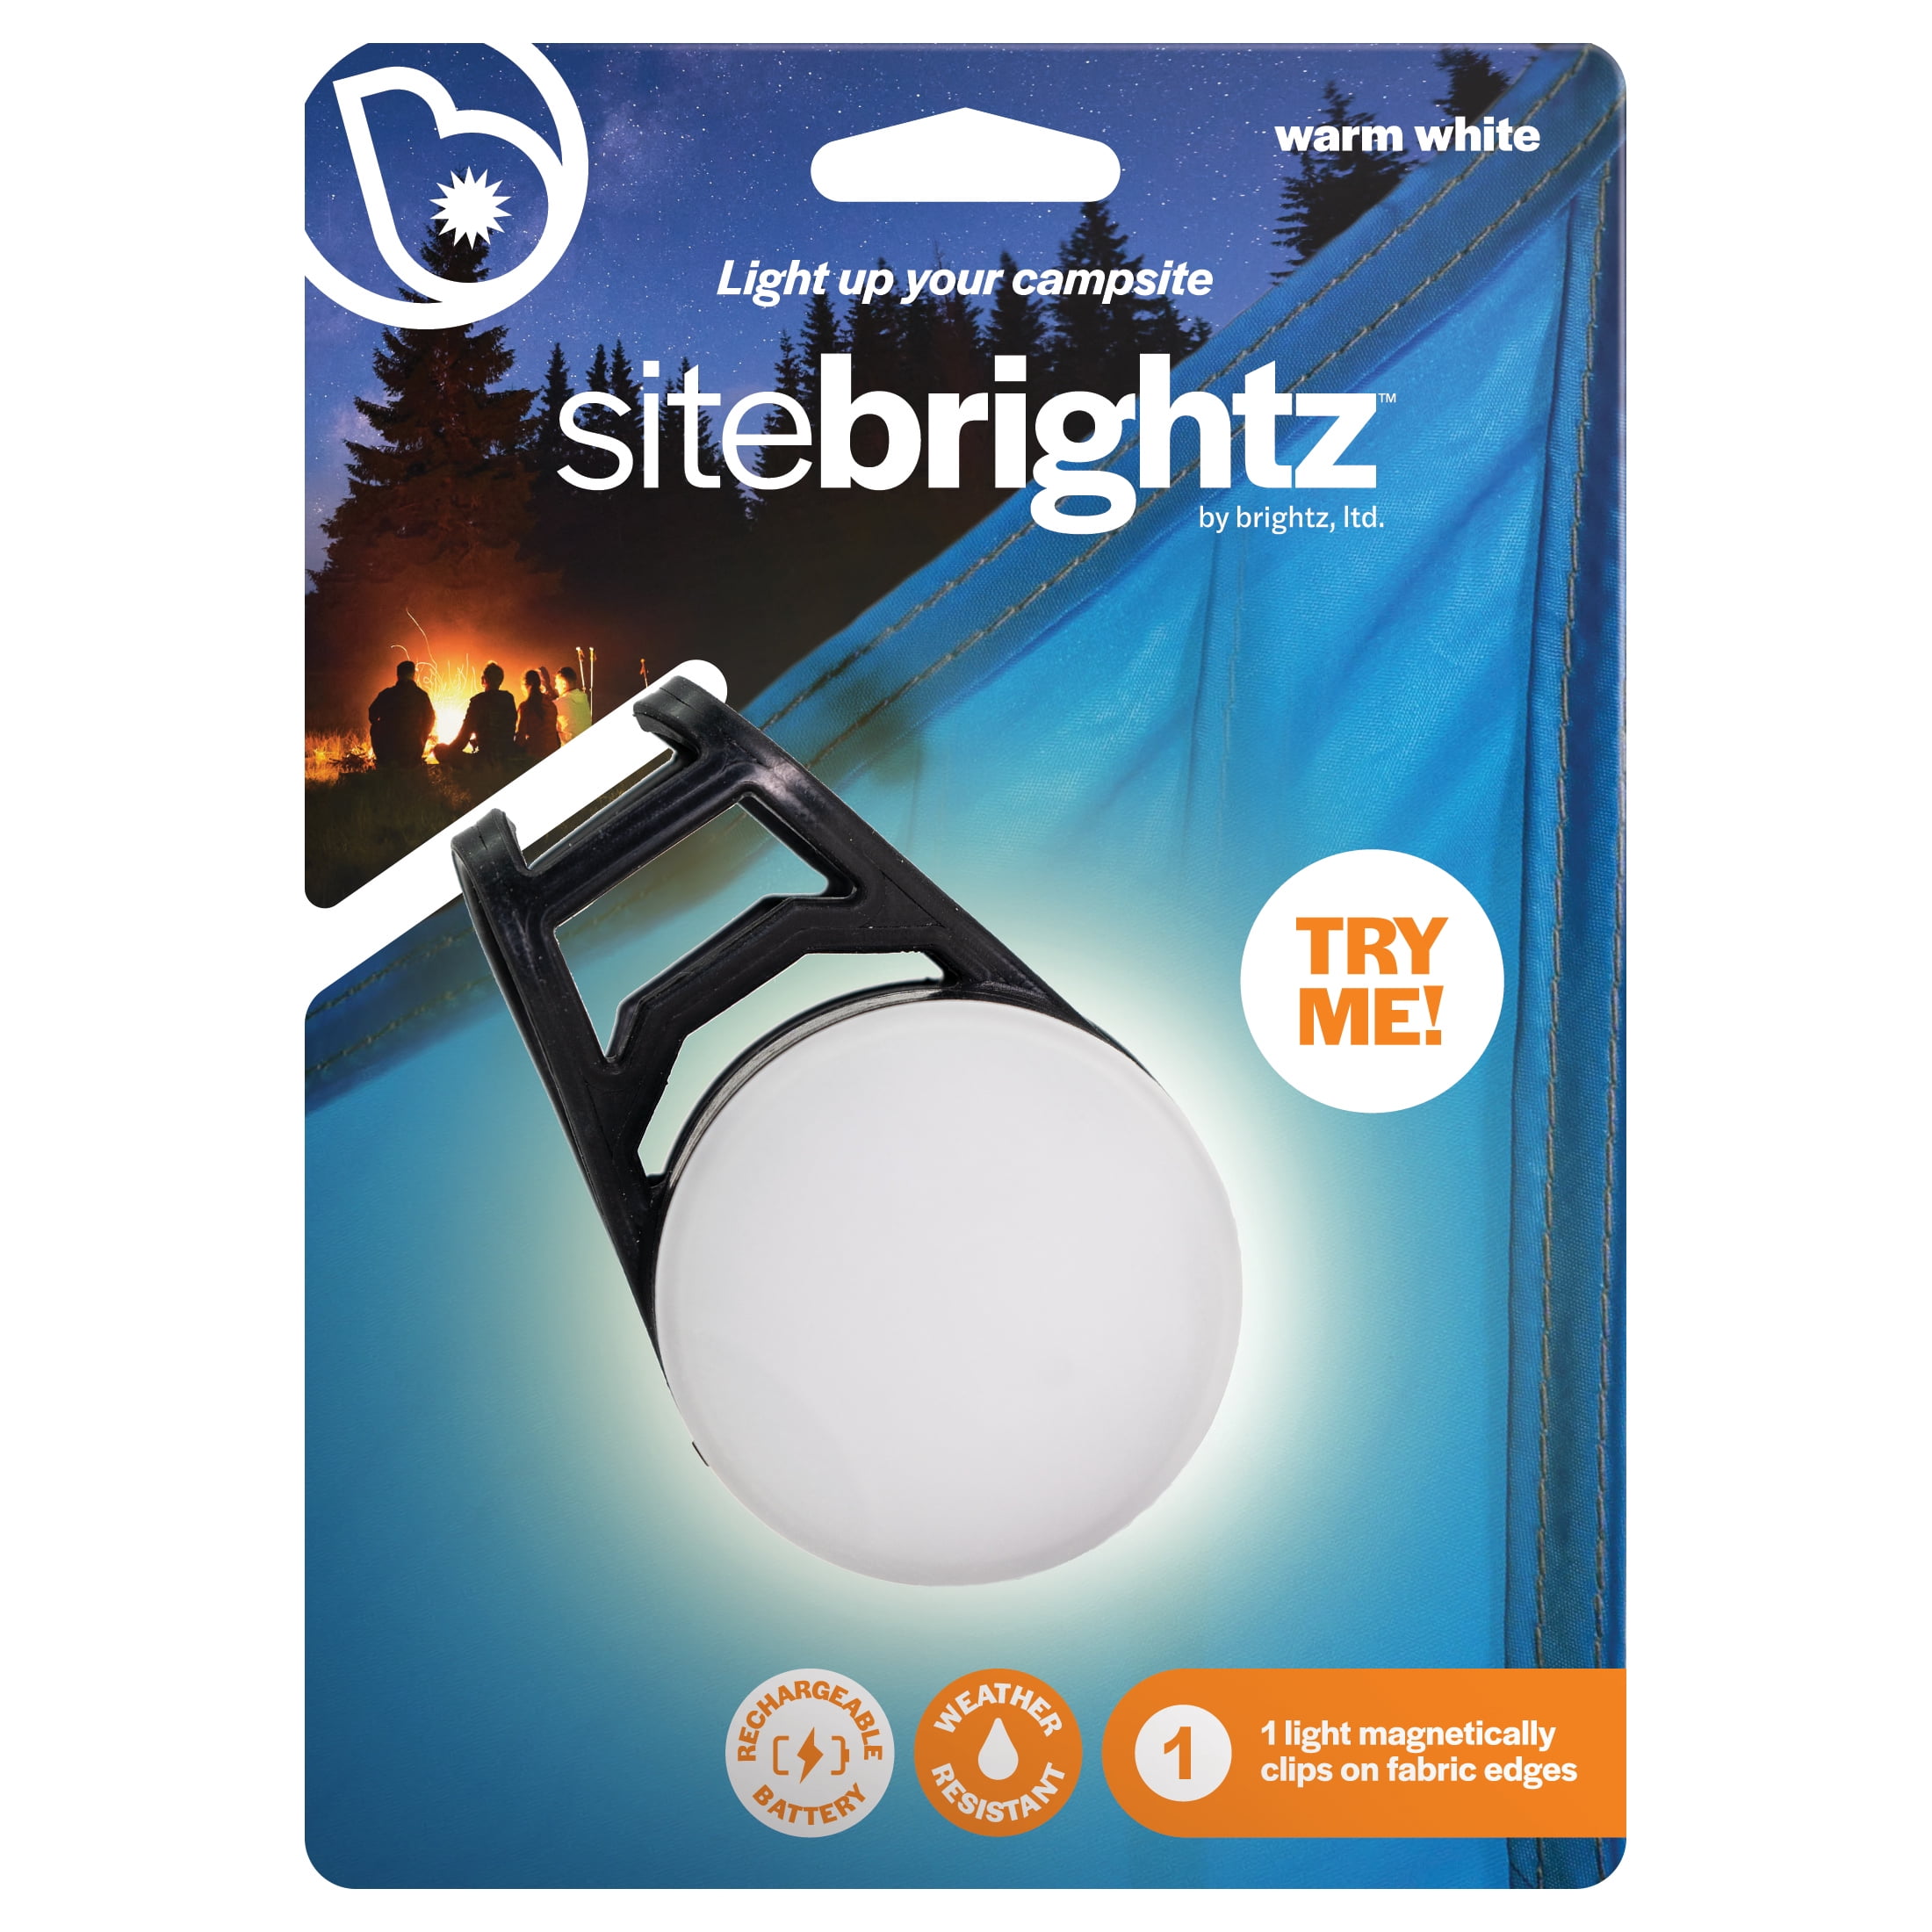 Brightz Sitebrightz Warm White 46 Lumen Magnetic LED Clamp Light for Tents with 3 Settings